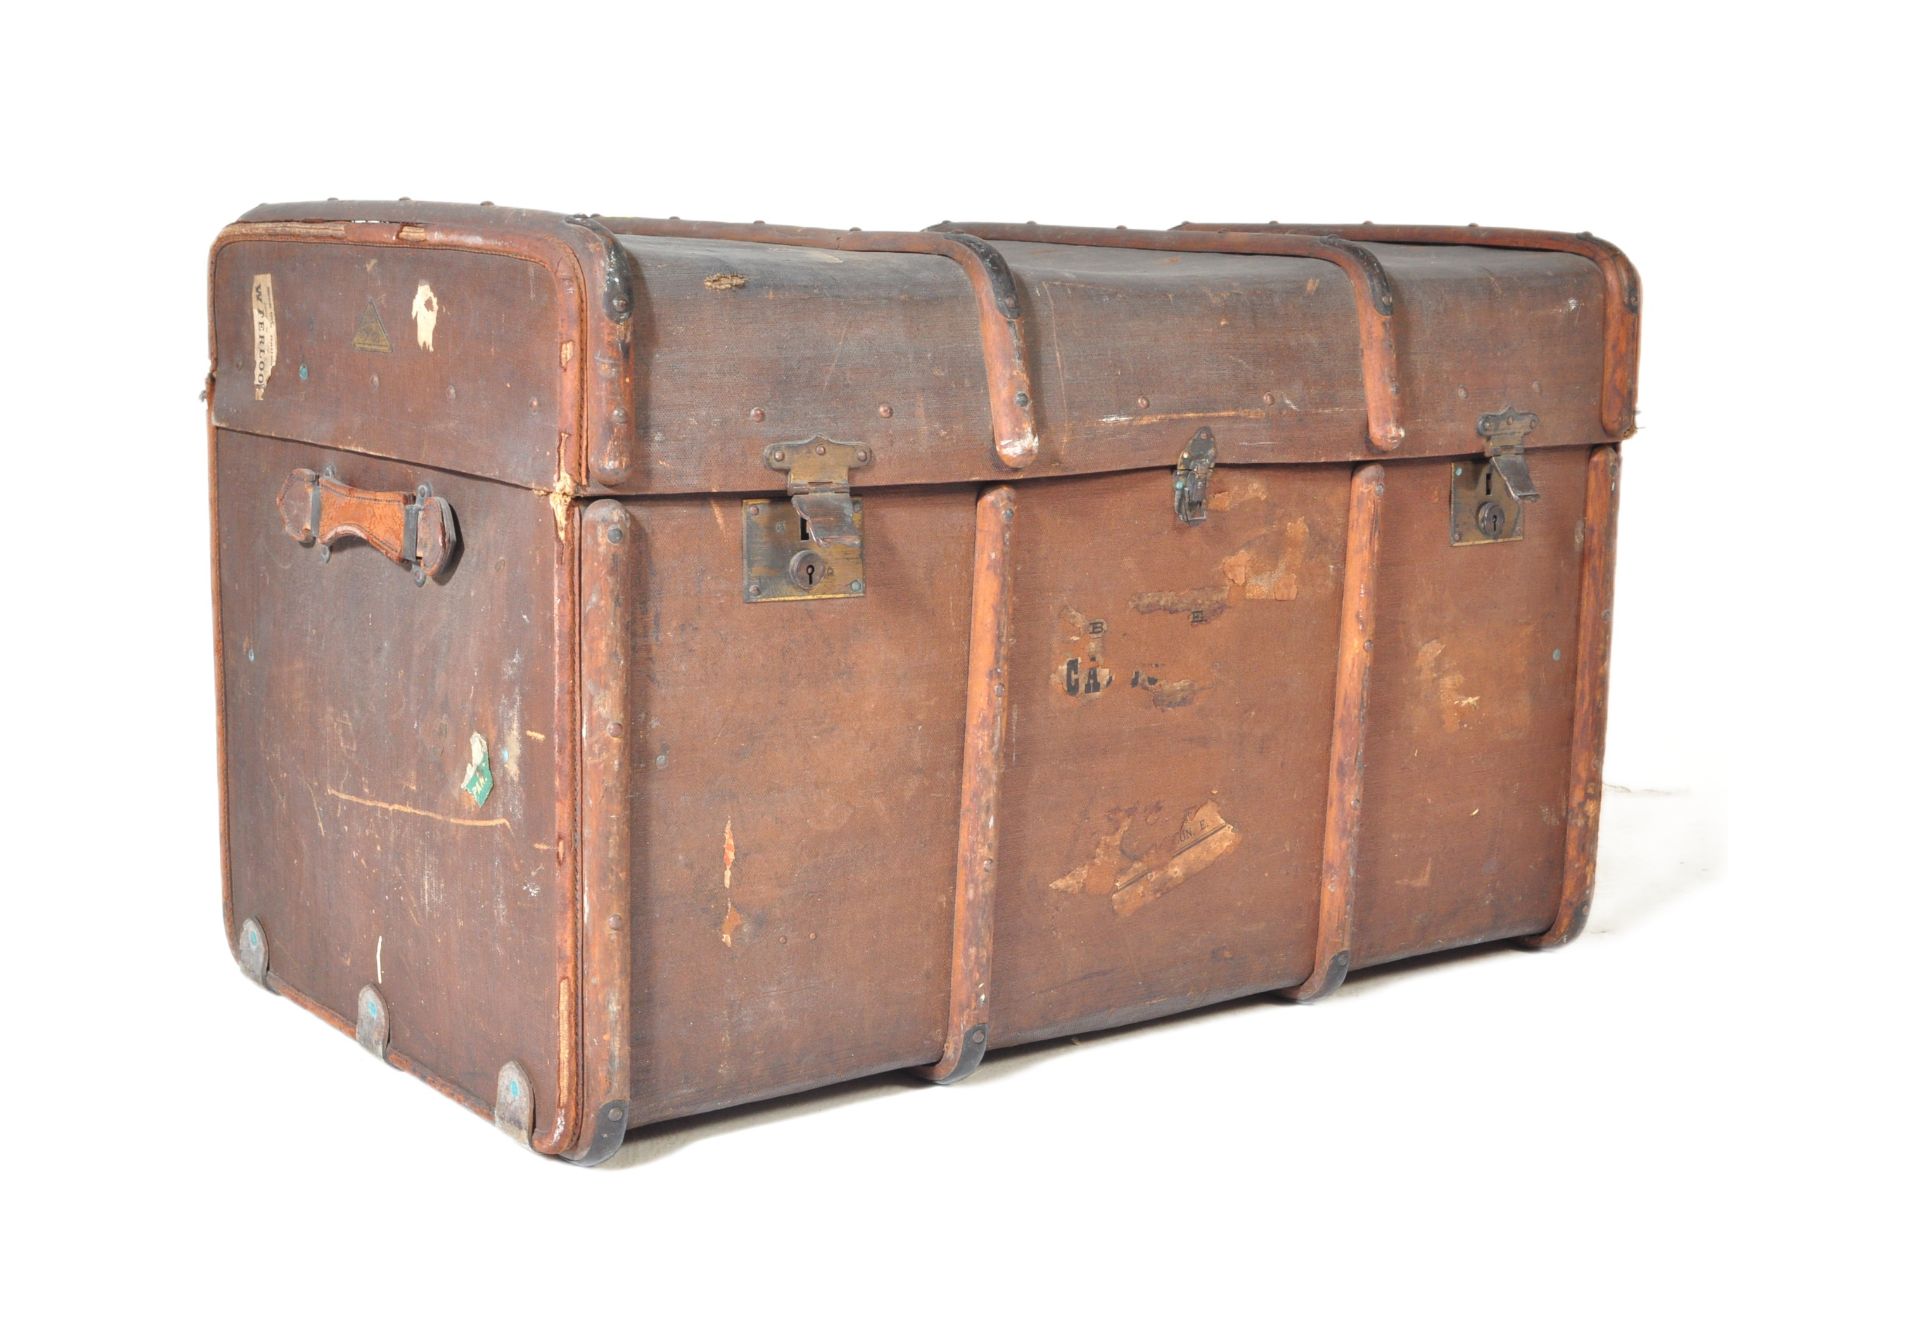 EARLY 20TH CENTURY CANVAS STEAMER TRUNK